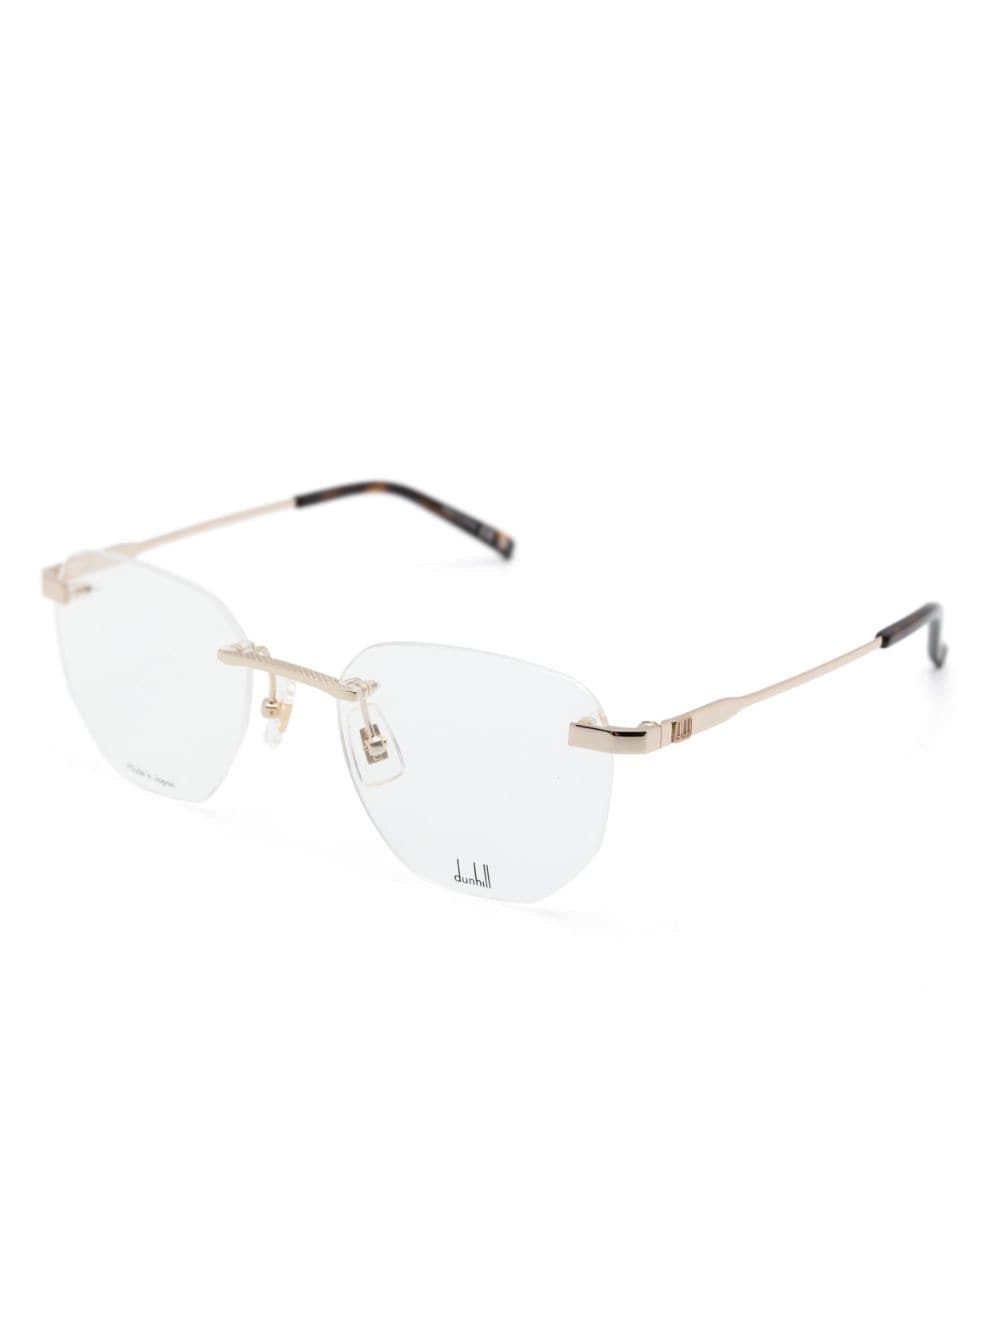 Dunhill thin-arms Frameless Glasses - Farfetch